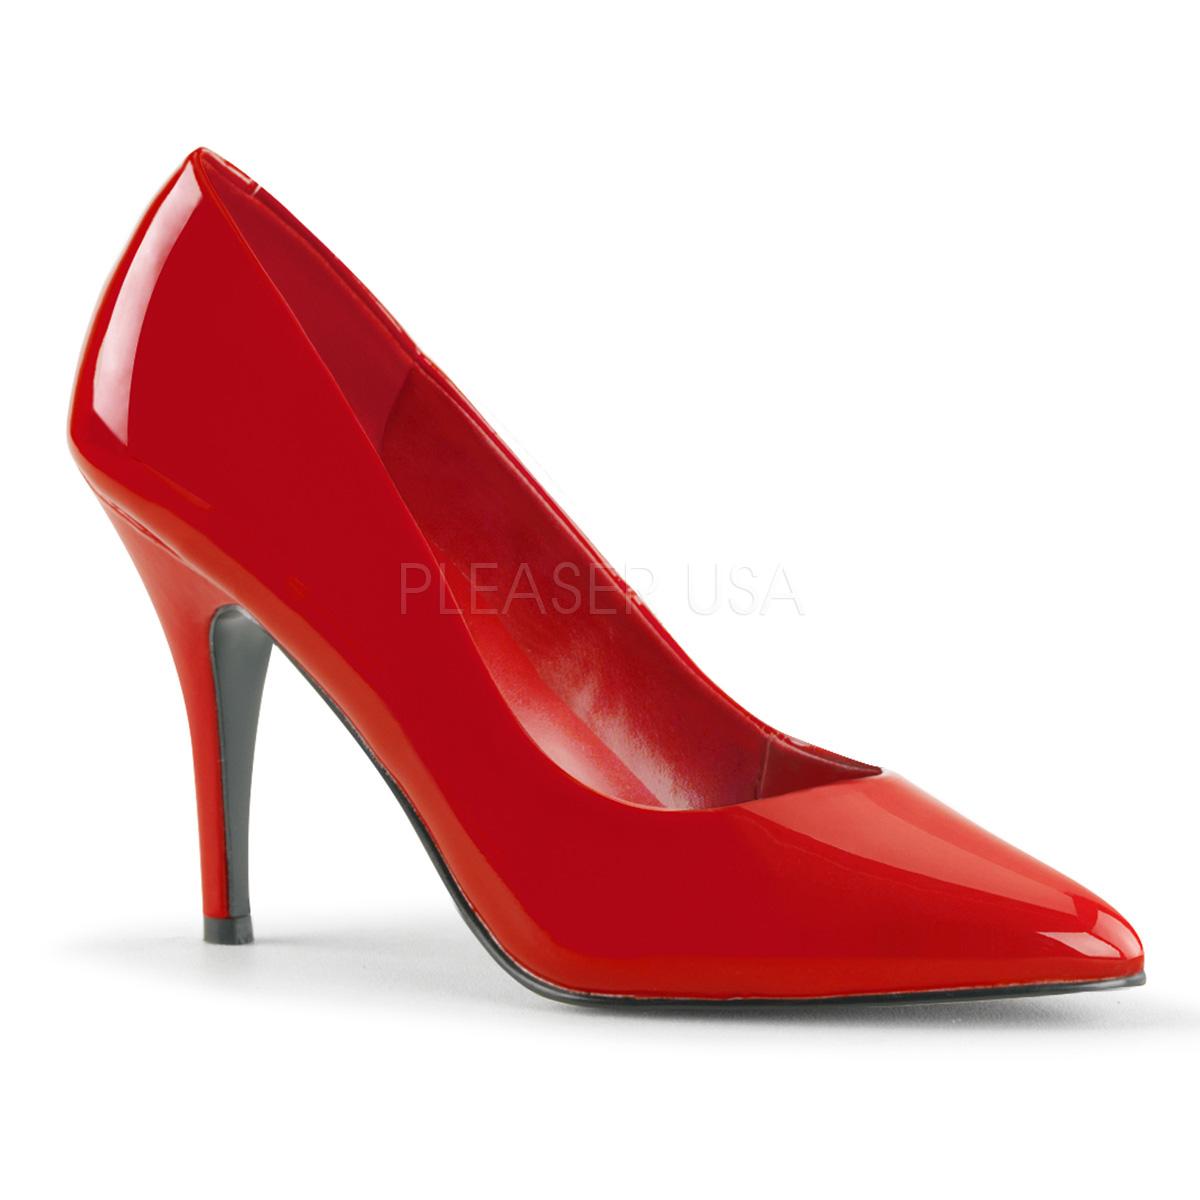 Large fitting Red Patent Court Shoe